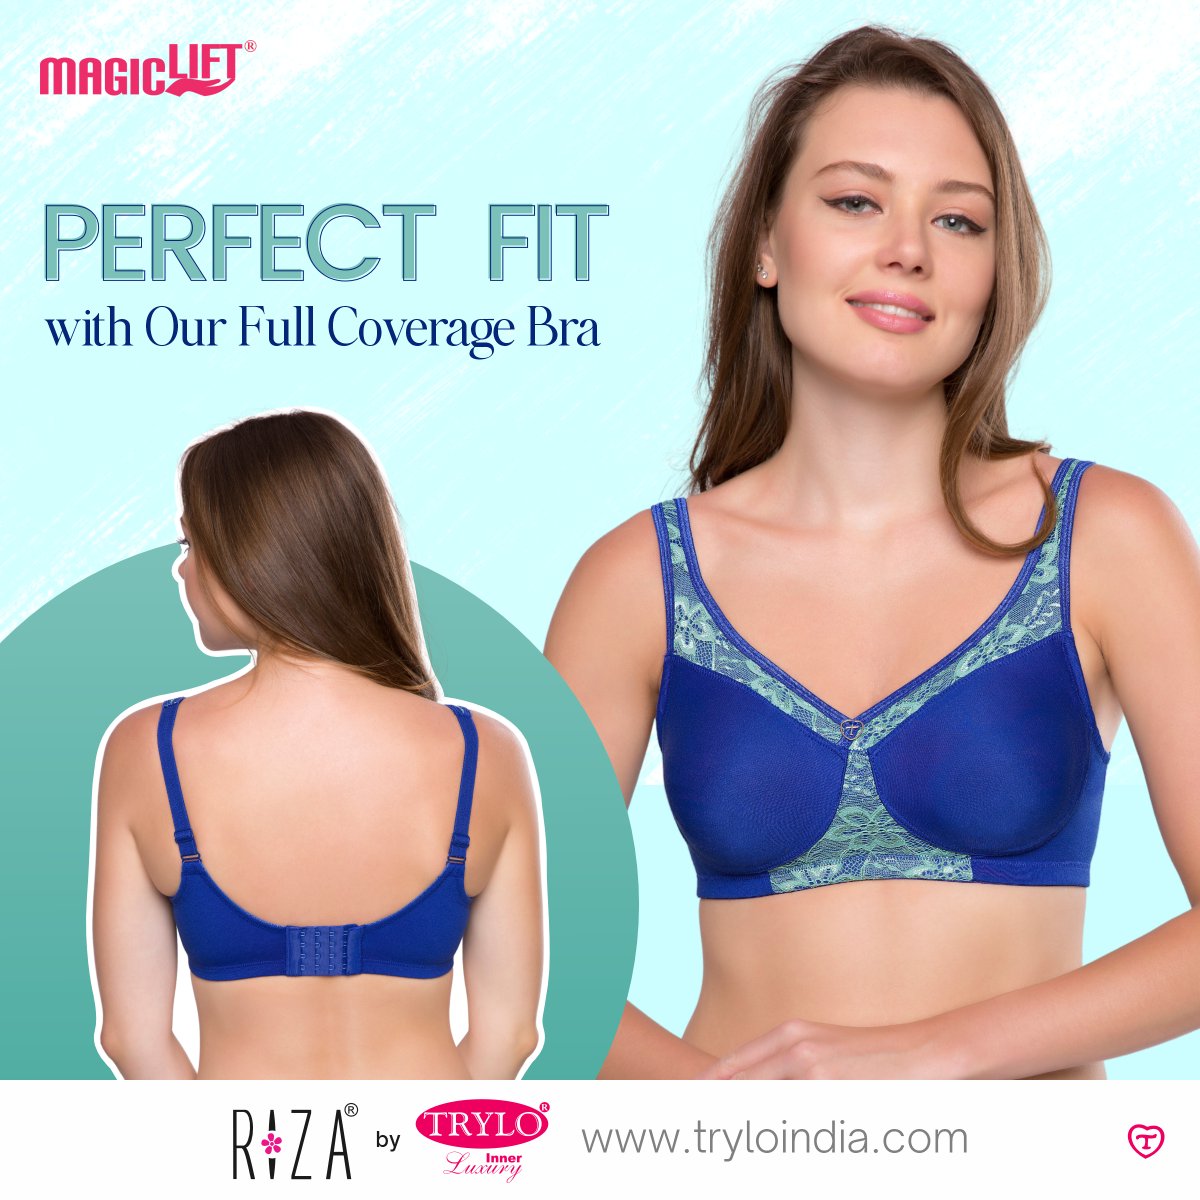 This bra is designed to give you ultimate support and lift. 

Product shown- Riza Magiclift

#Trylo #TryloIndia #TryloIntimates #TryloBra #TryloBraOnline #Riza #RizaIntimates #RizabyTrylo #RizaCollection #Womenbra #Nonpaddedbra #Nonwiredbra #Seamlessbra